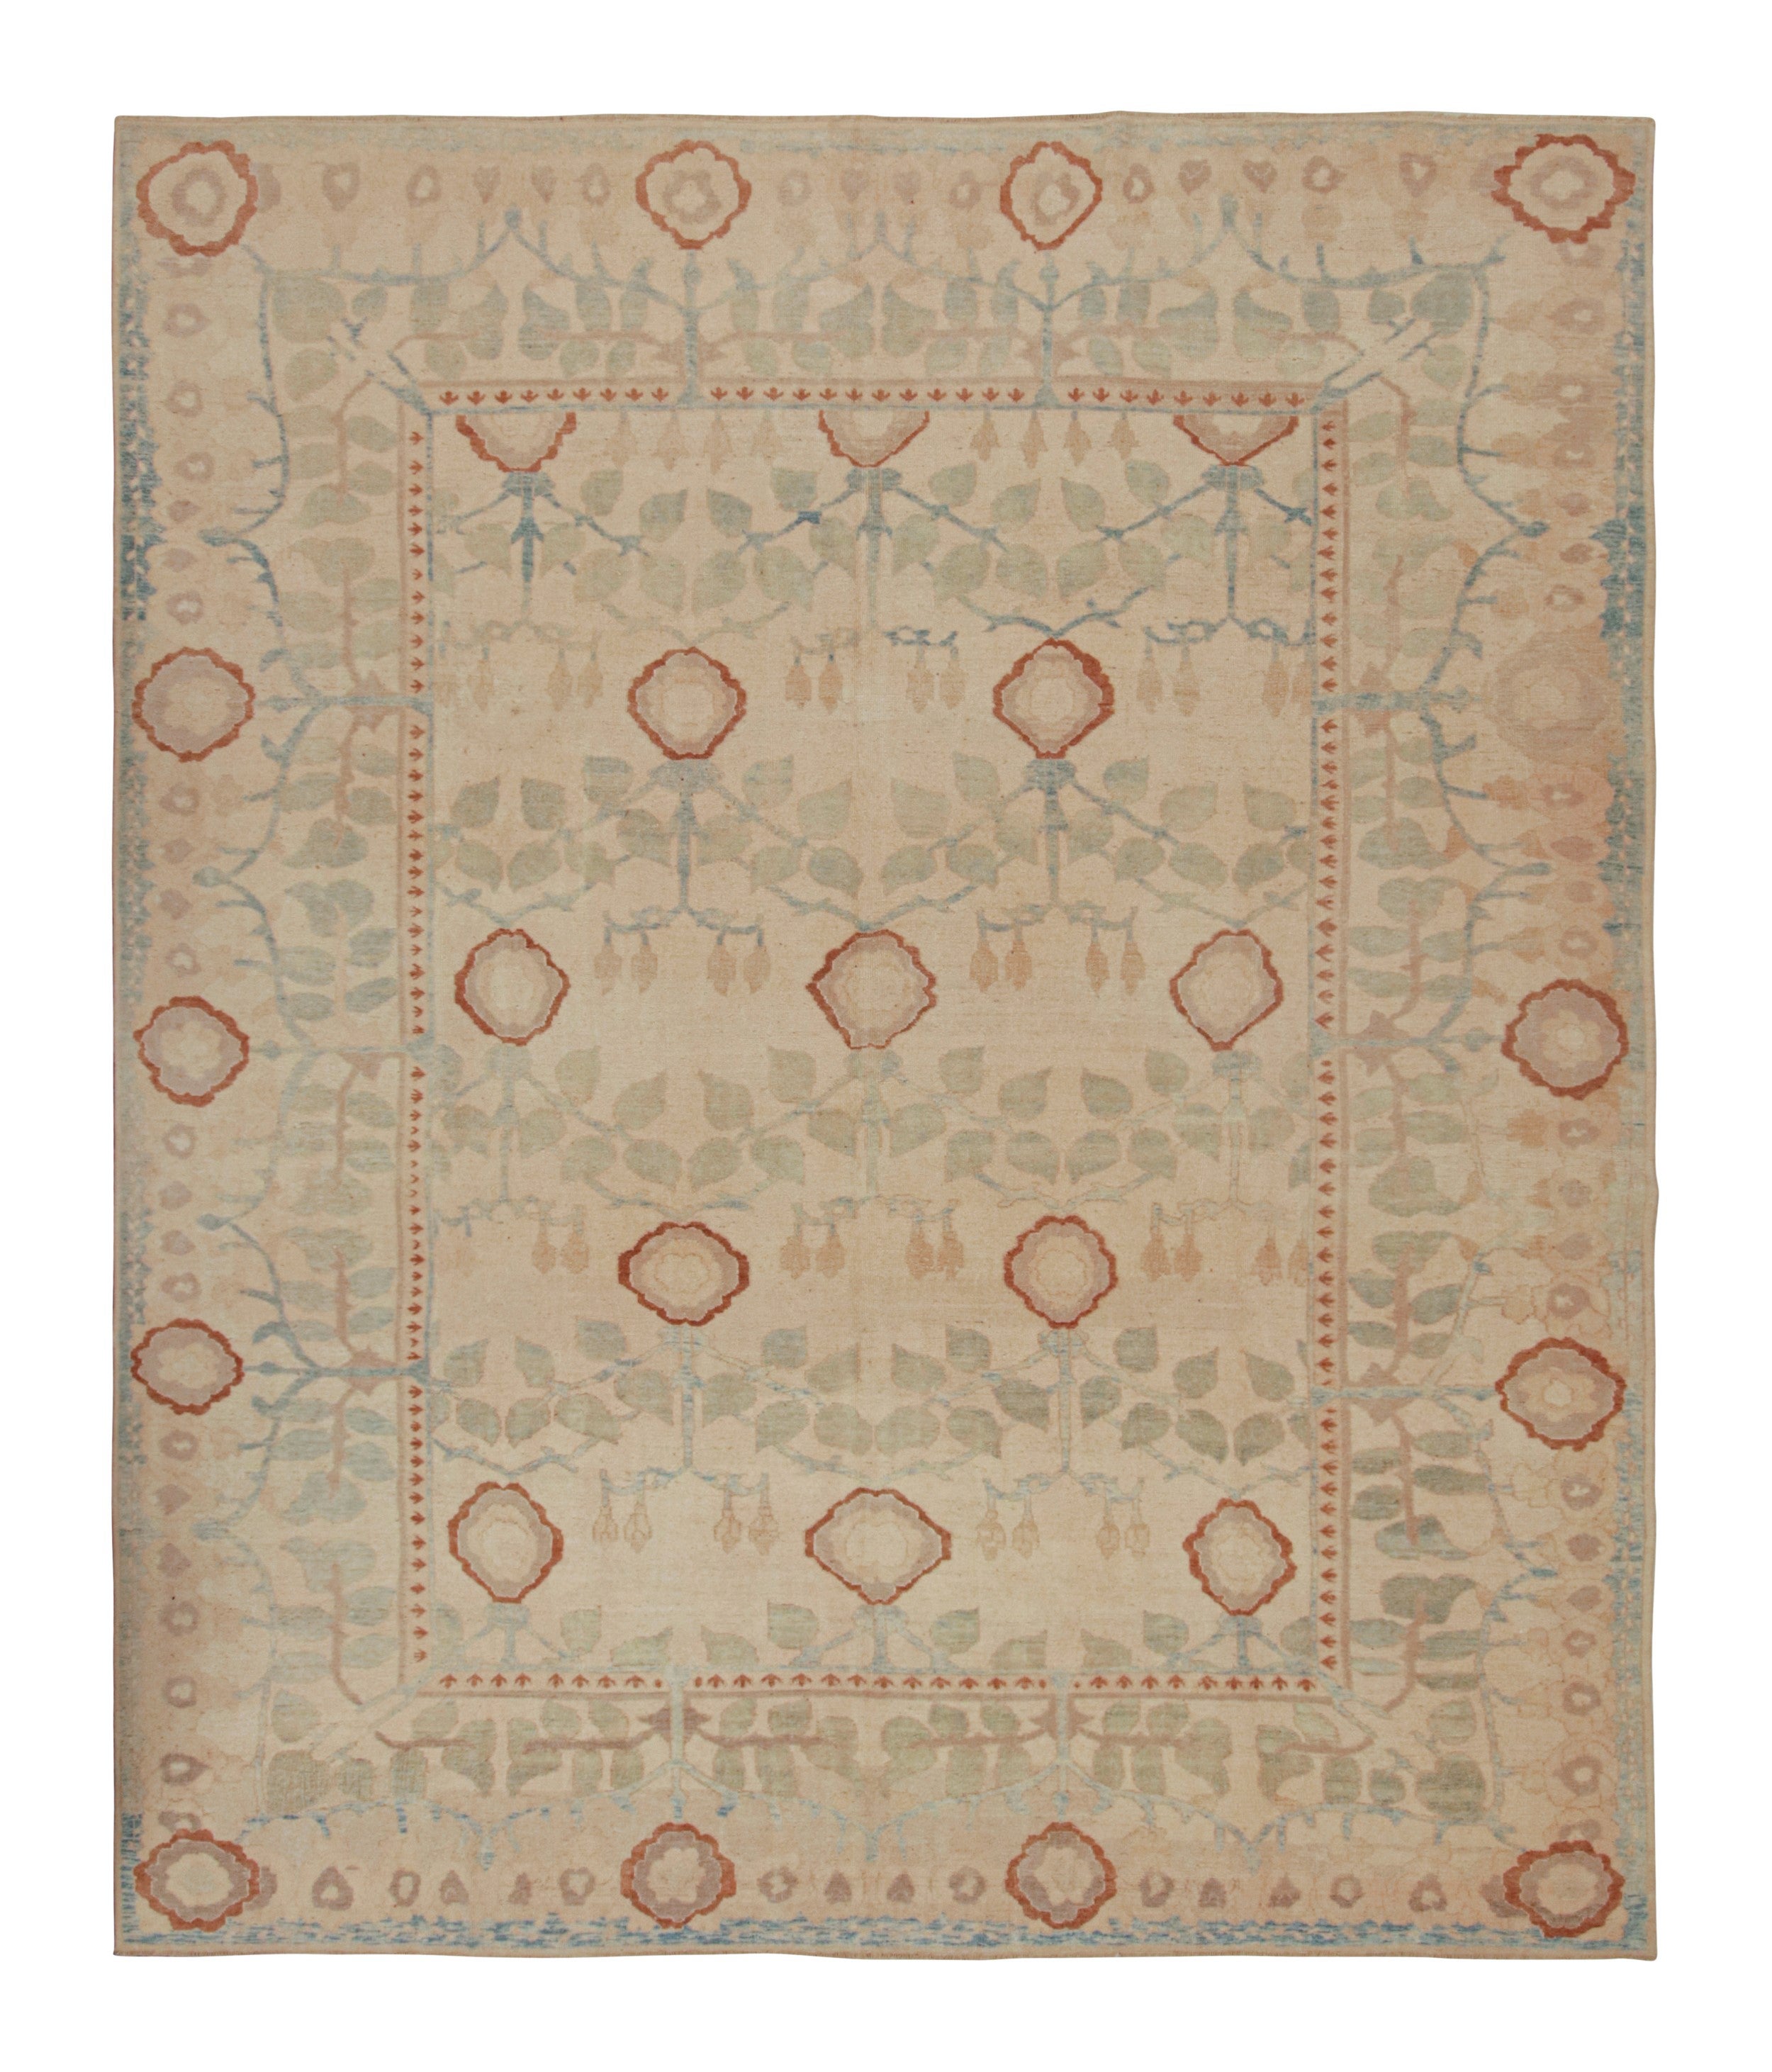 Antique Oushak Rug in Beige with Green and Blue Floral Patterns from Rug & Kilim